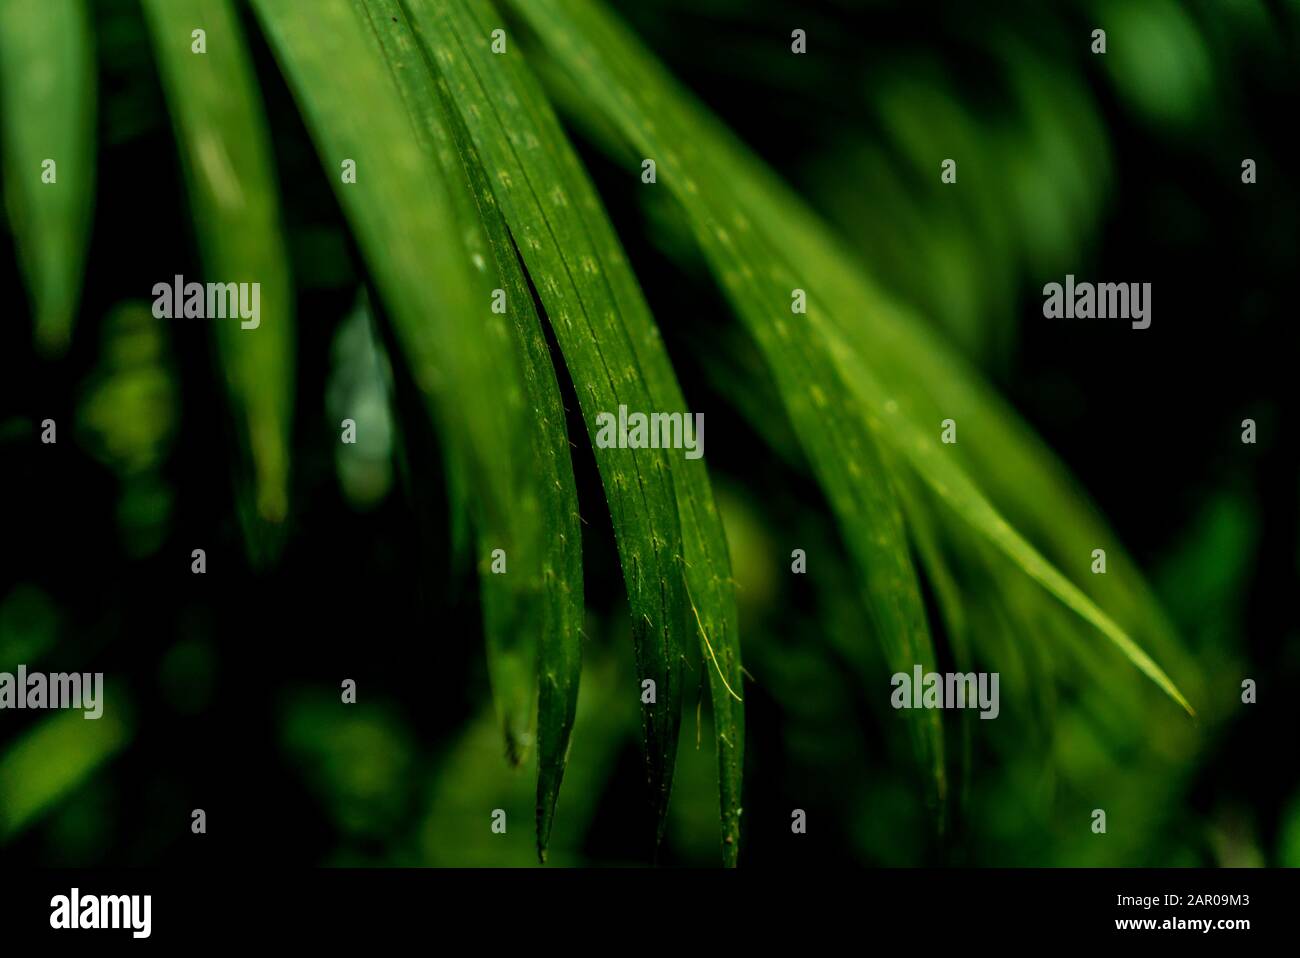 Green leaves in front of black background Stock Photo